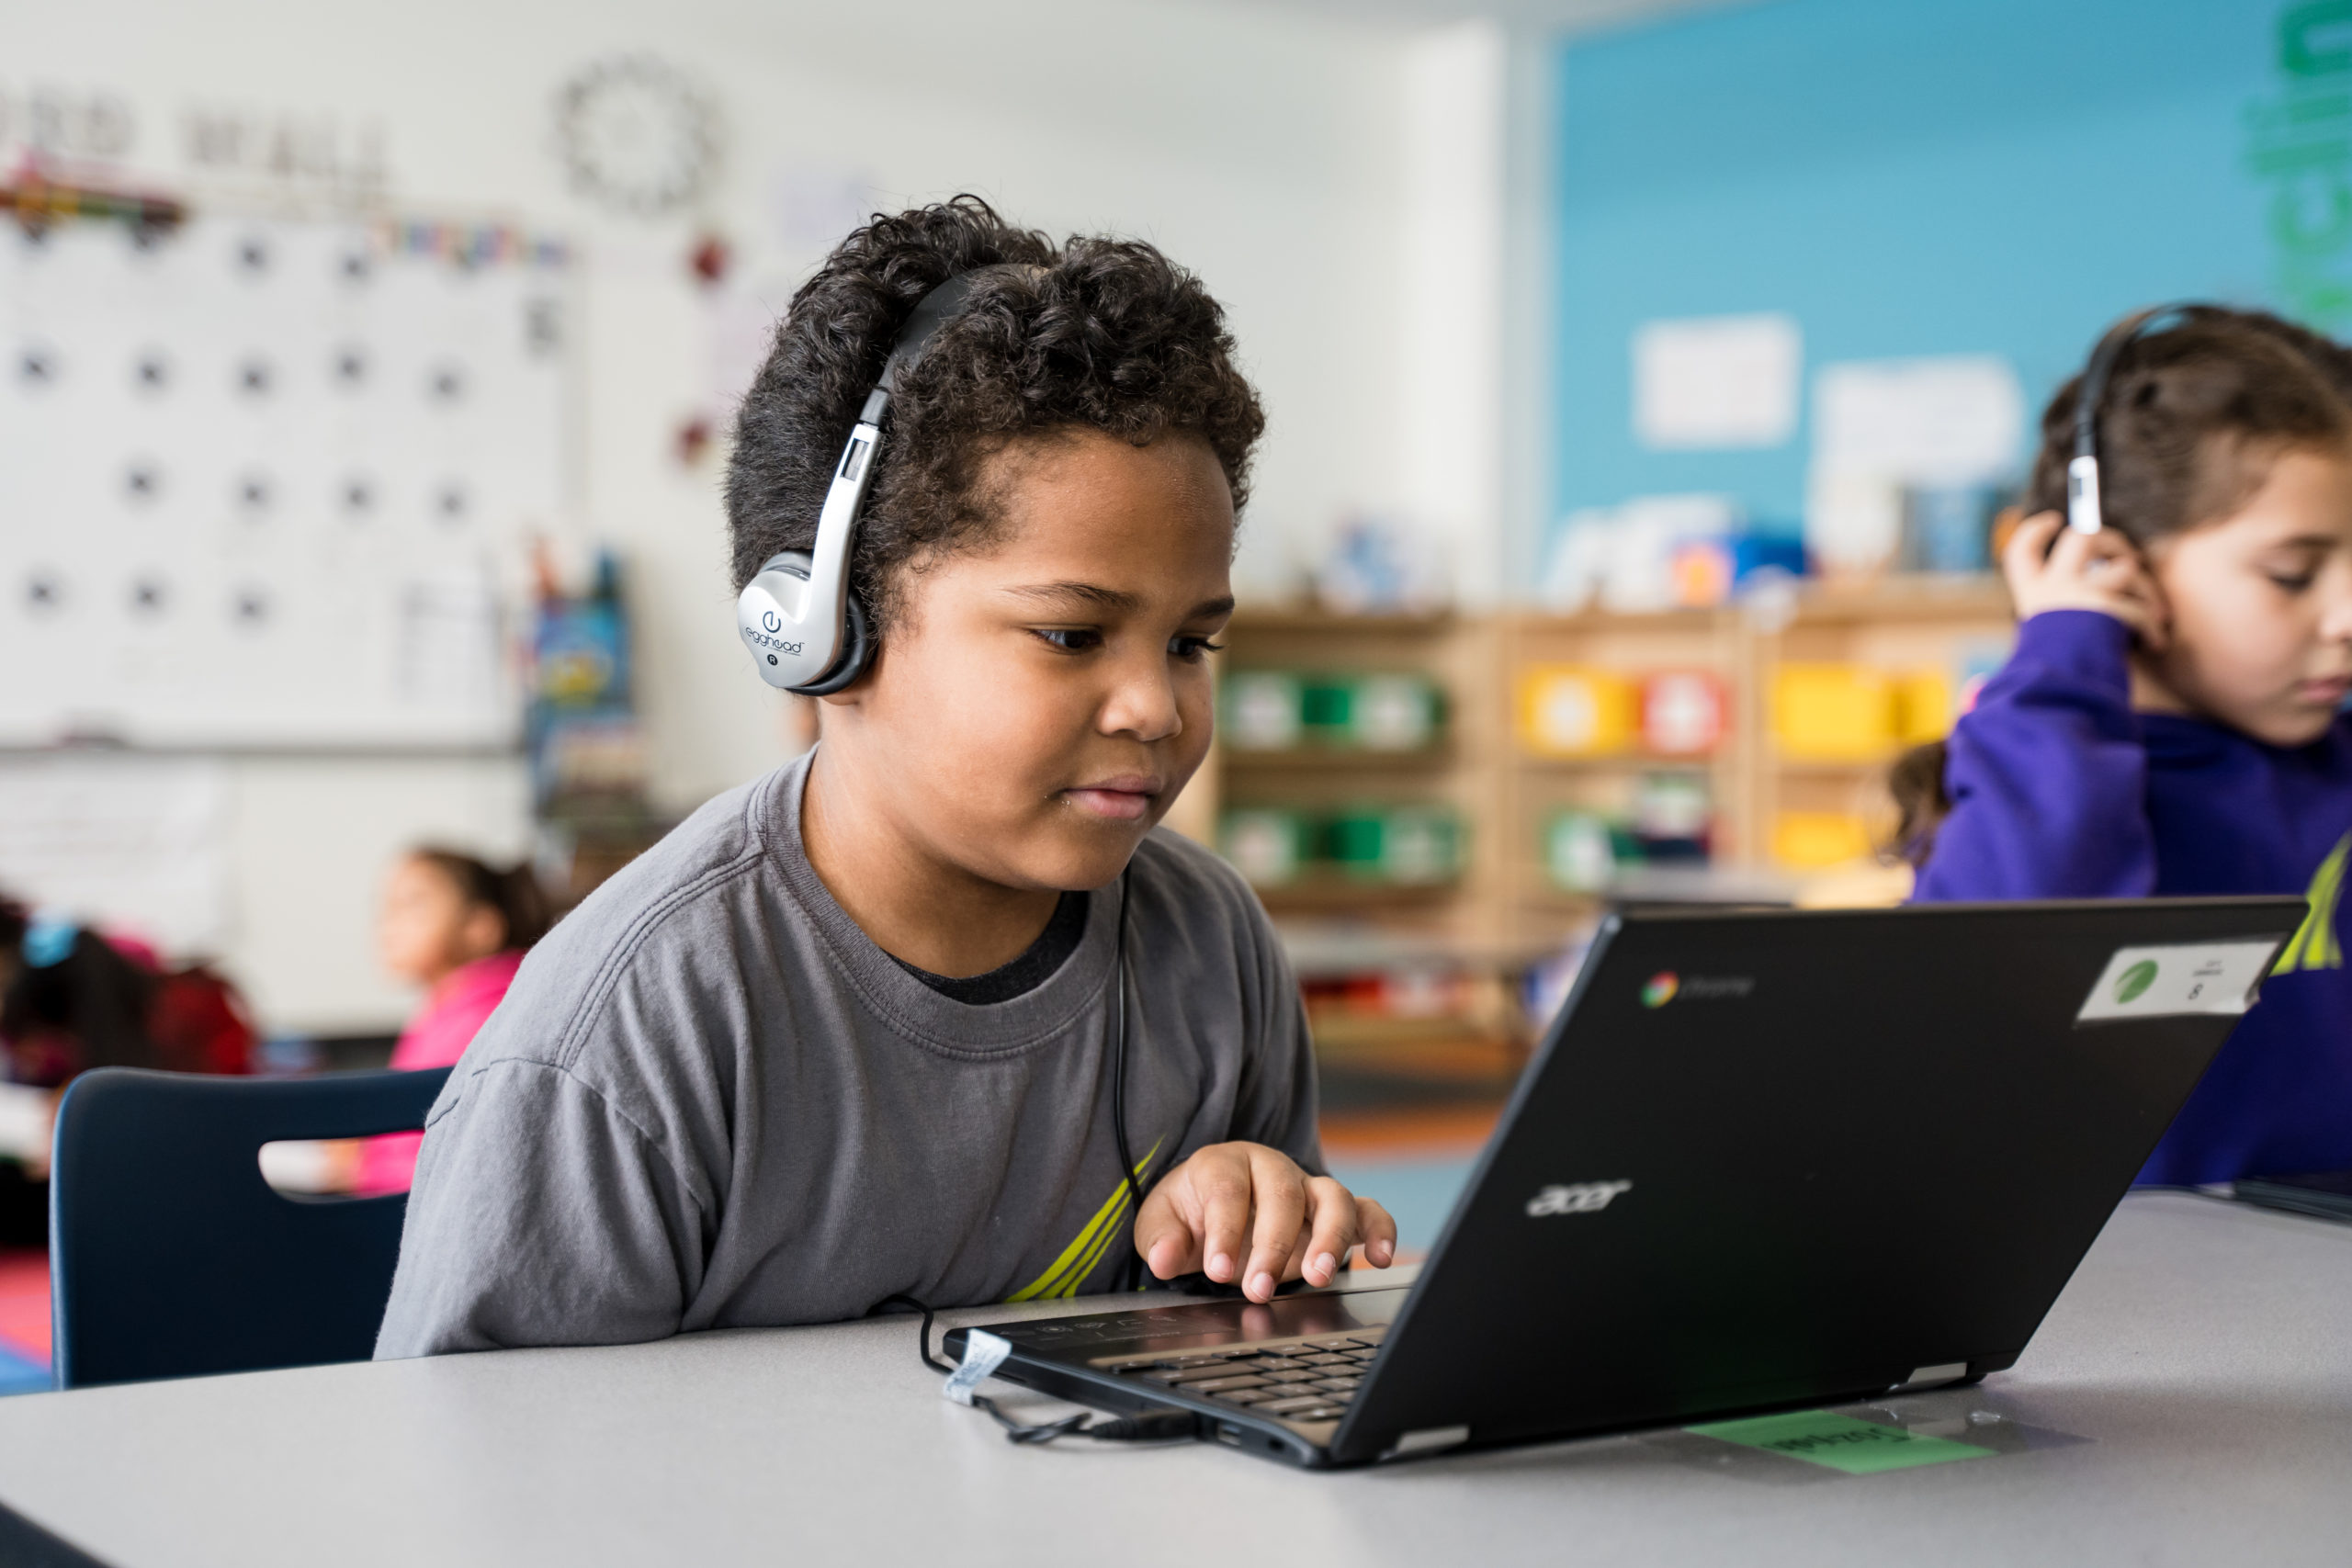 Child with headphones and computer remote learning